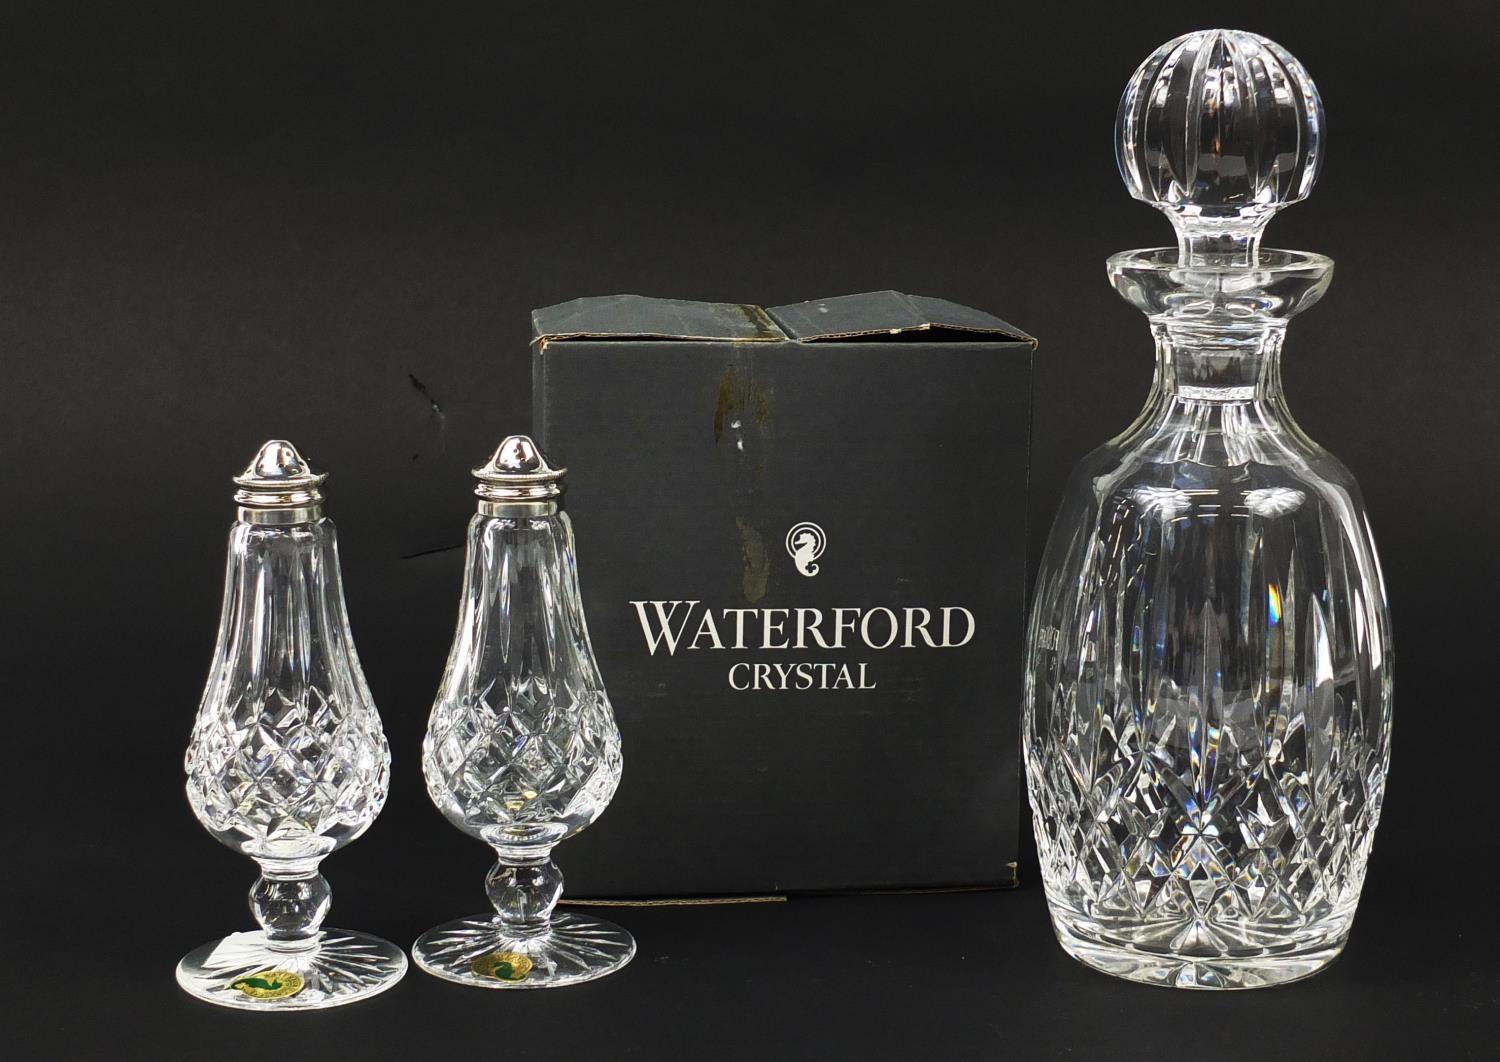 Waterford Crystal comprising a Lismore pattern decanter and salt and pepper sifters with box, the